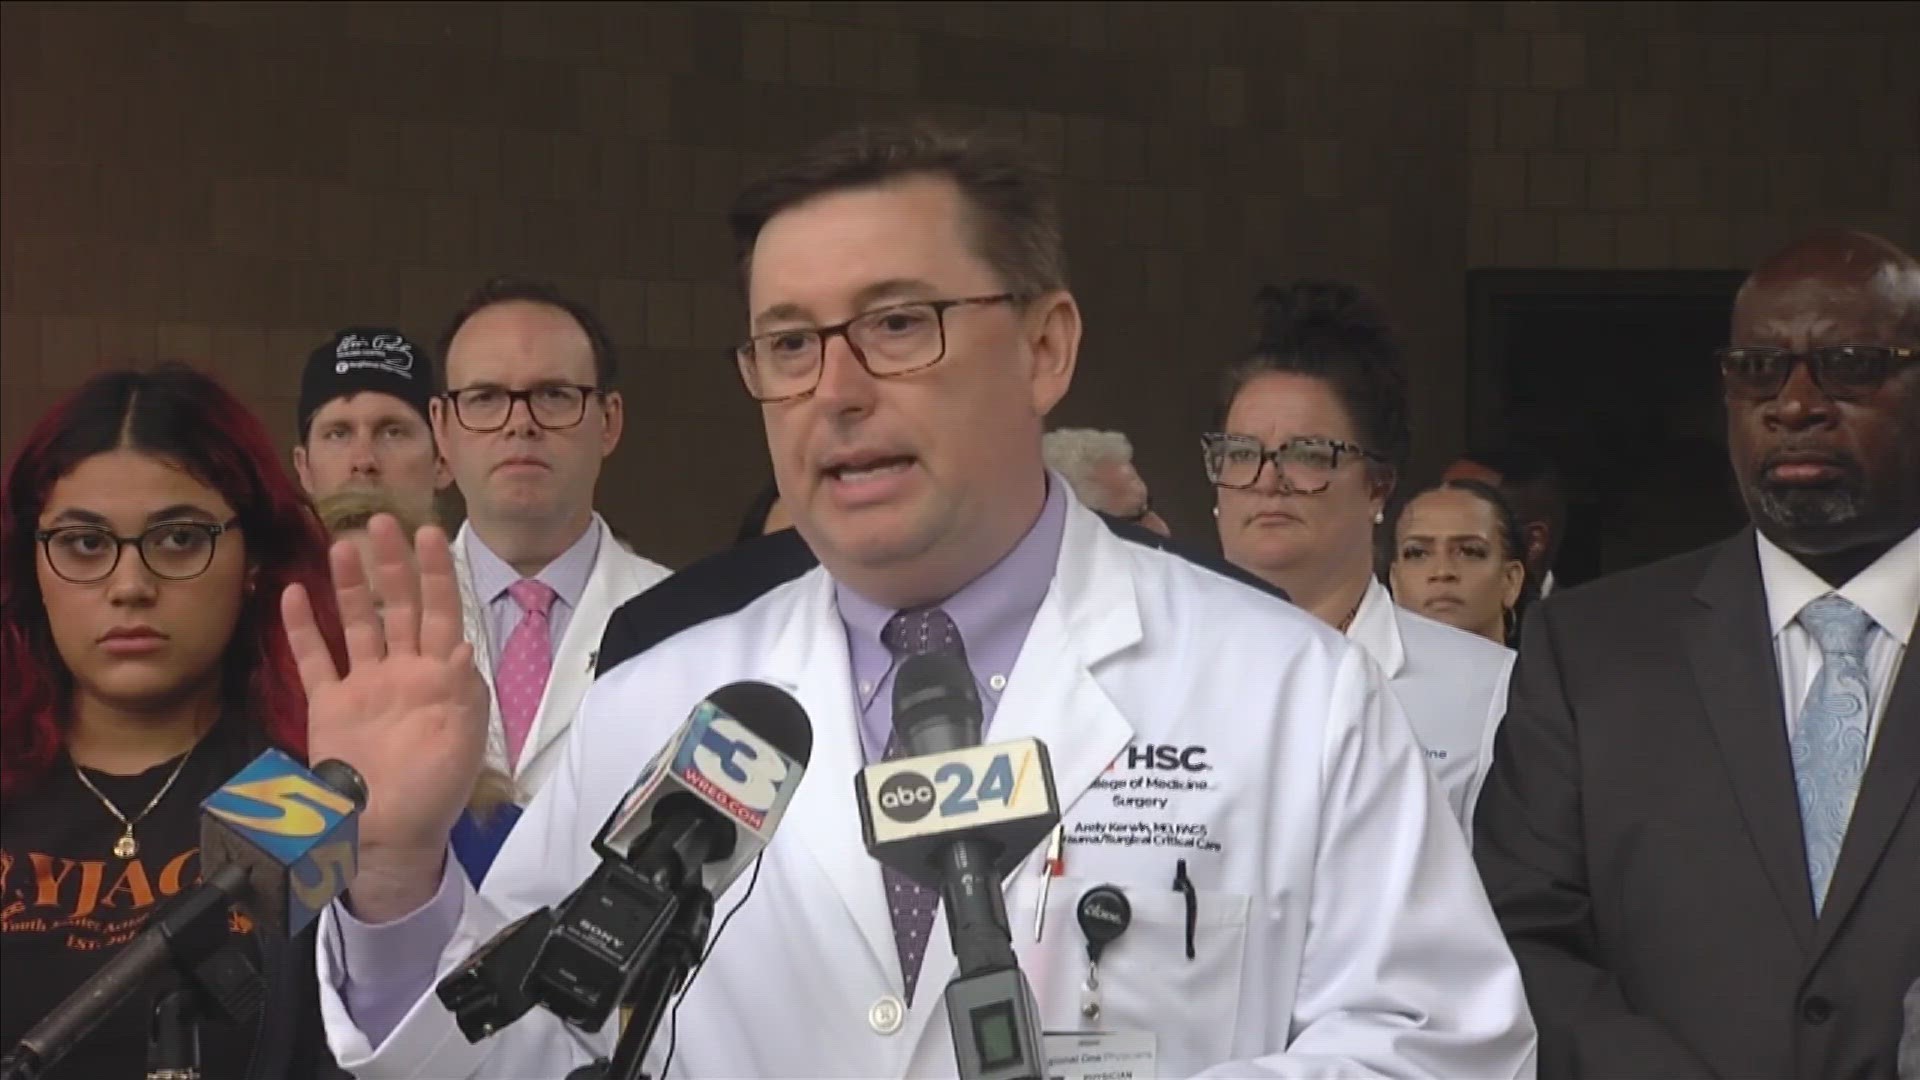 Representatives from Regional One and LeBonheur Children's Hospitals held a press conference Wednesday, demanding more be done about gun violence.